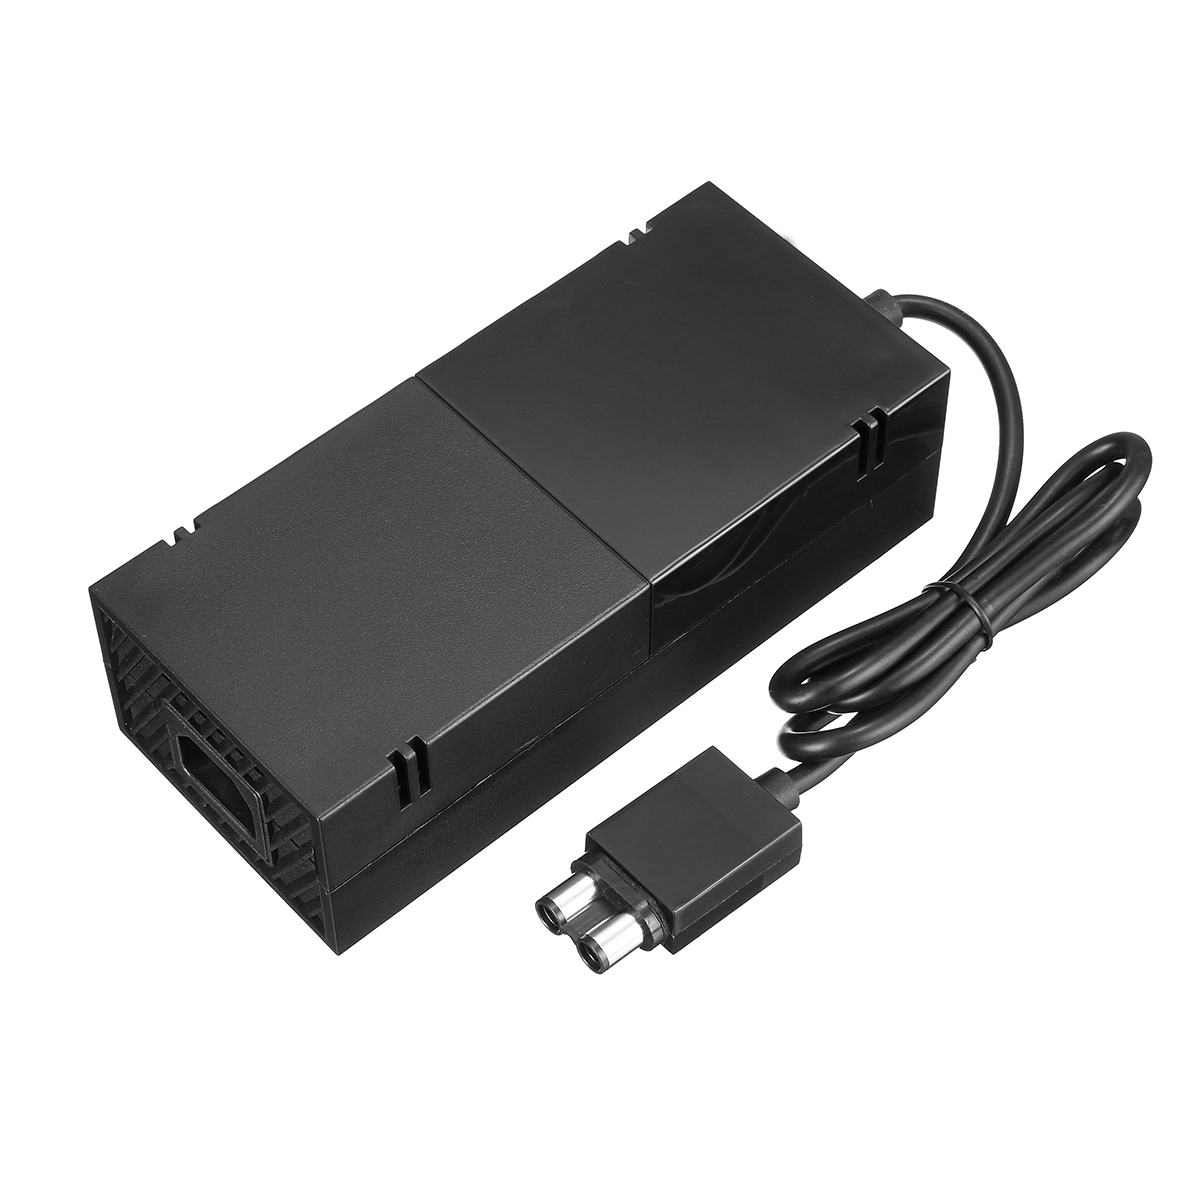 AC Adapter Charger Power Supply Cord Cable Unit for Microsoft Xbox One Console 28